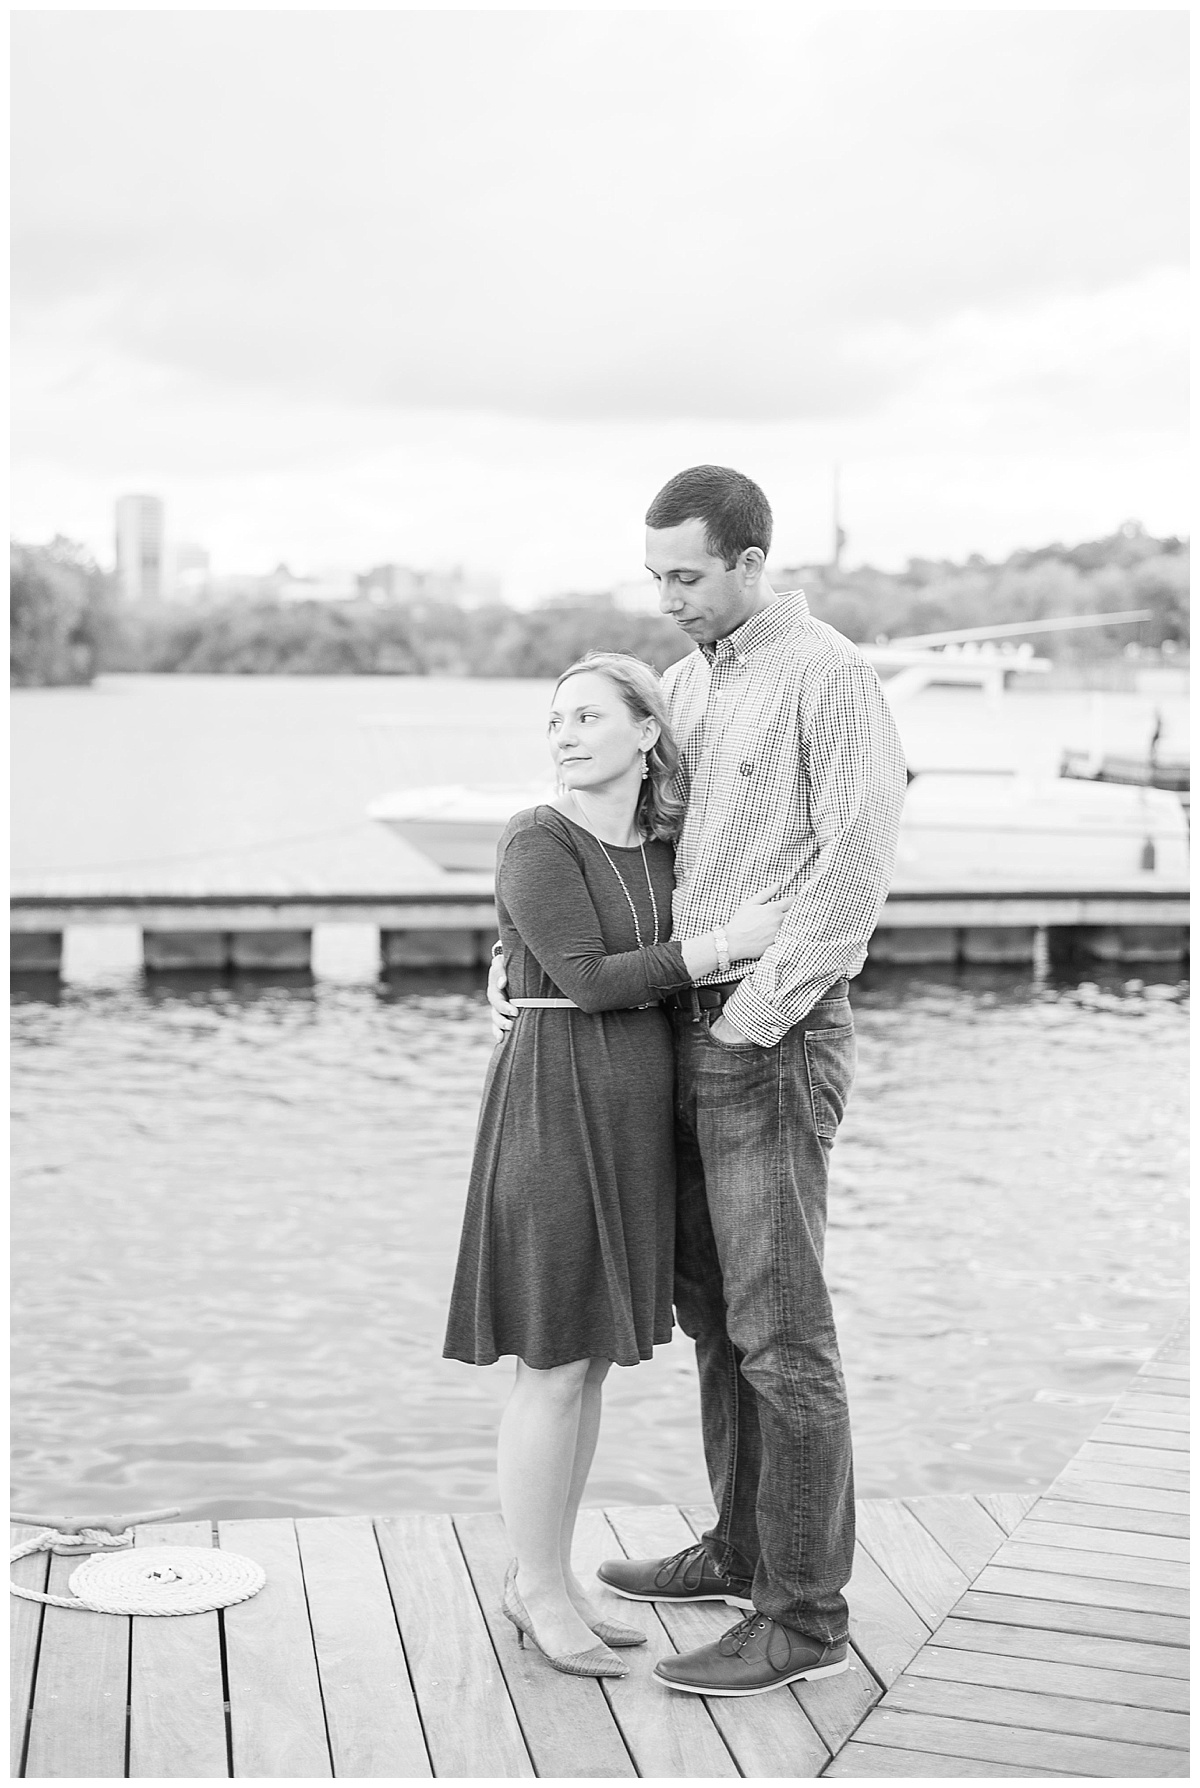 Downtown Richmond Virginia, Richmond Engagement Pictures, RVA, Richmond Wedding, Fall Engagement Pictures, Waterfront Pictures, Caiti Garter Photography